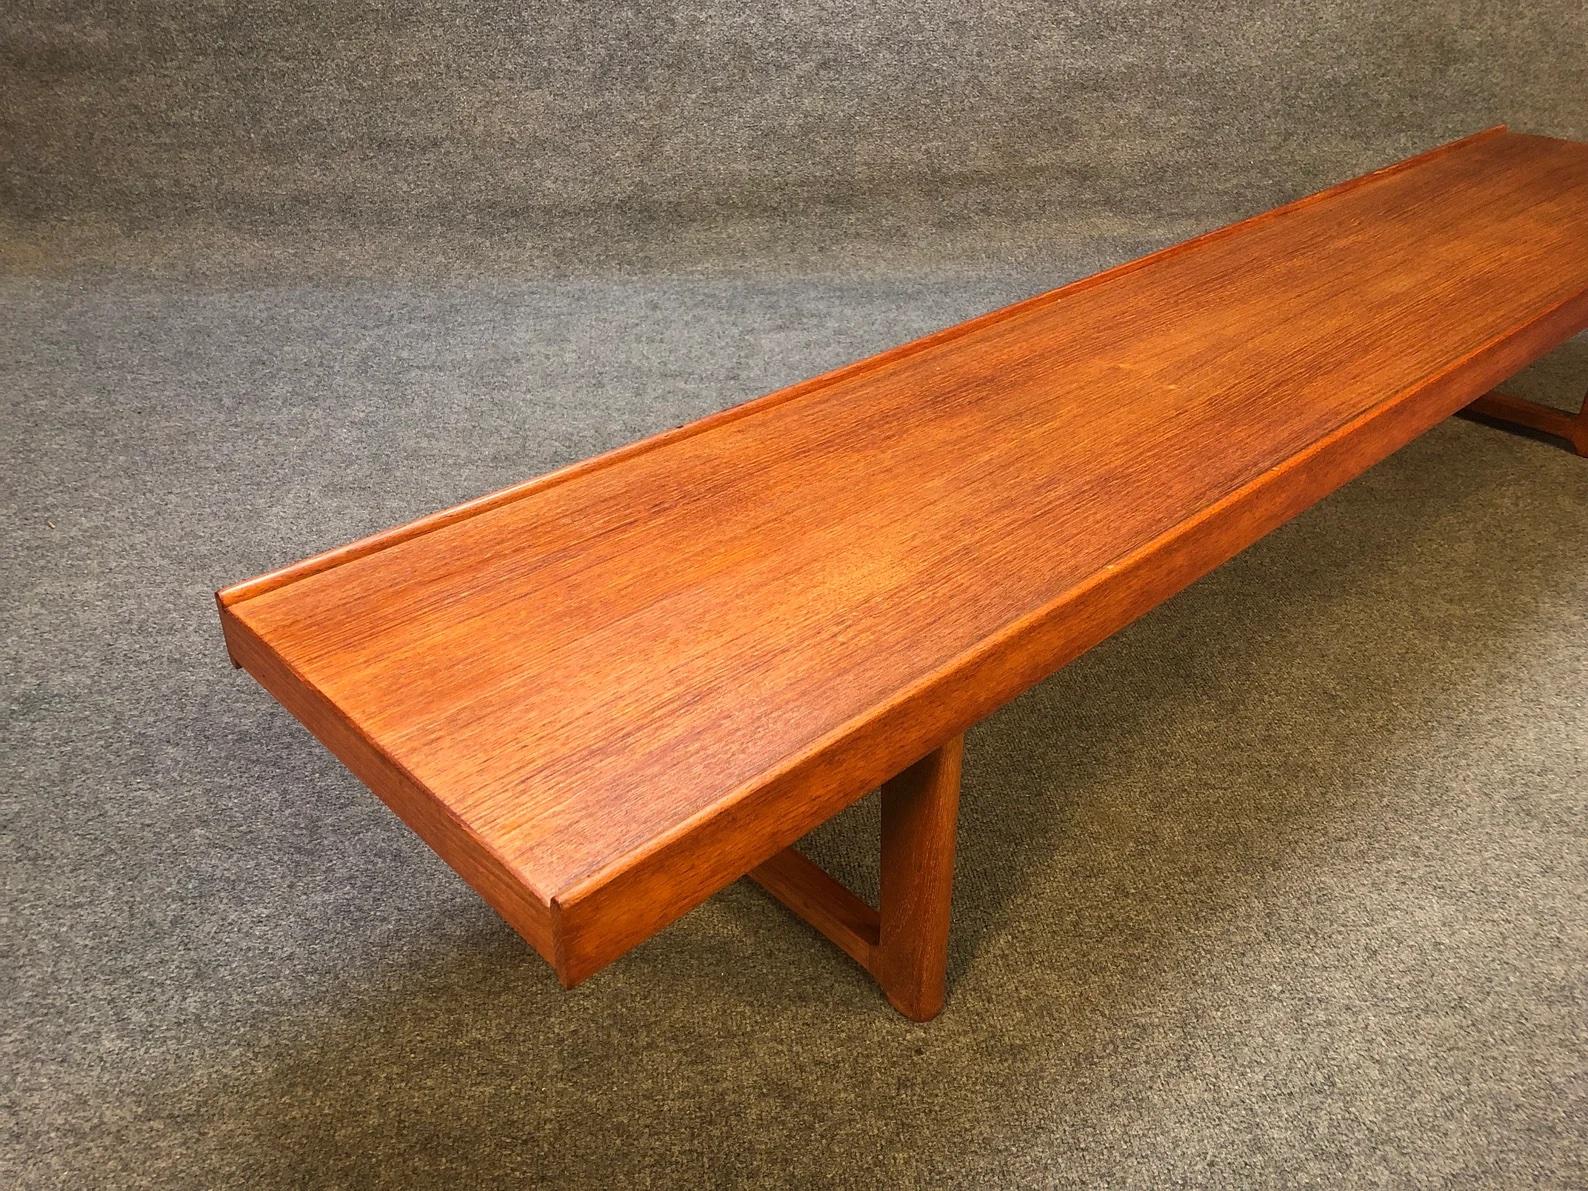 A Scandinavian Modern bench in a simple plank form in teak with two raised edges then resting on legs that join at the floor creating U-shaped pedestal bases. By Torbjörn Afdal for Mellemstrands Trevareindustri and distributed by Bruksbo Møbler.